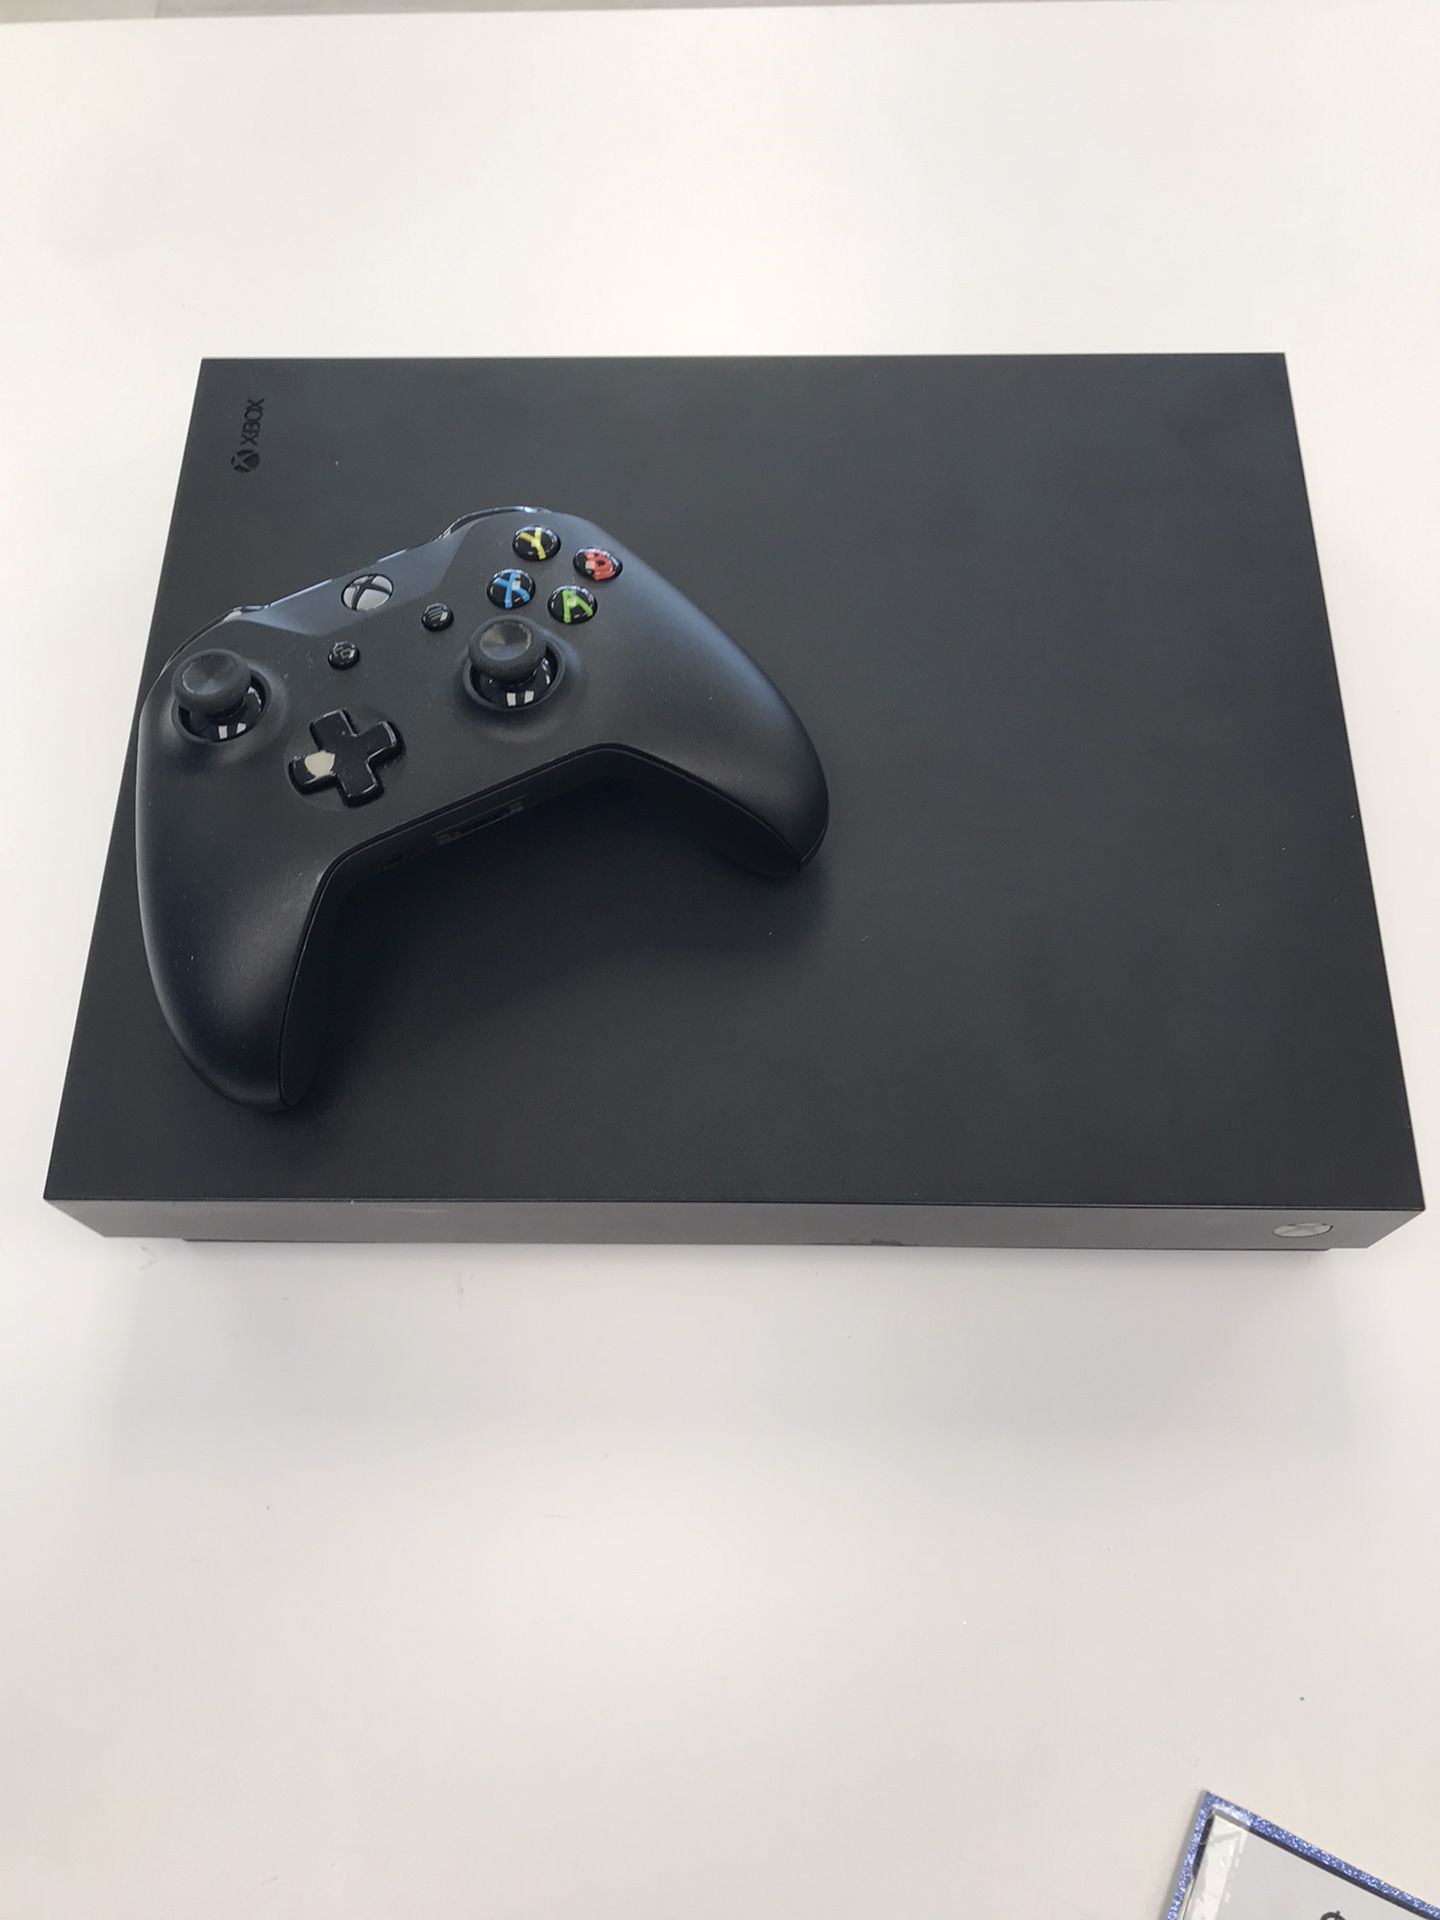 Microsoft Xbox One X Gaming Console 1TB - Pay $1 Today to Take it Home and Pay the Rest Later!